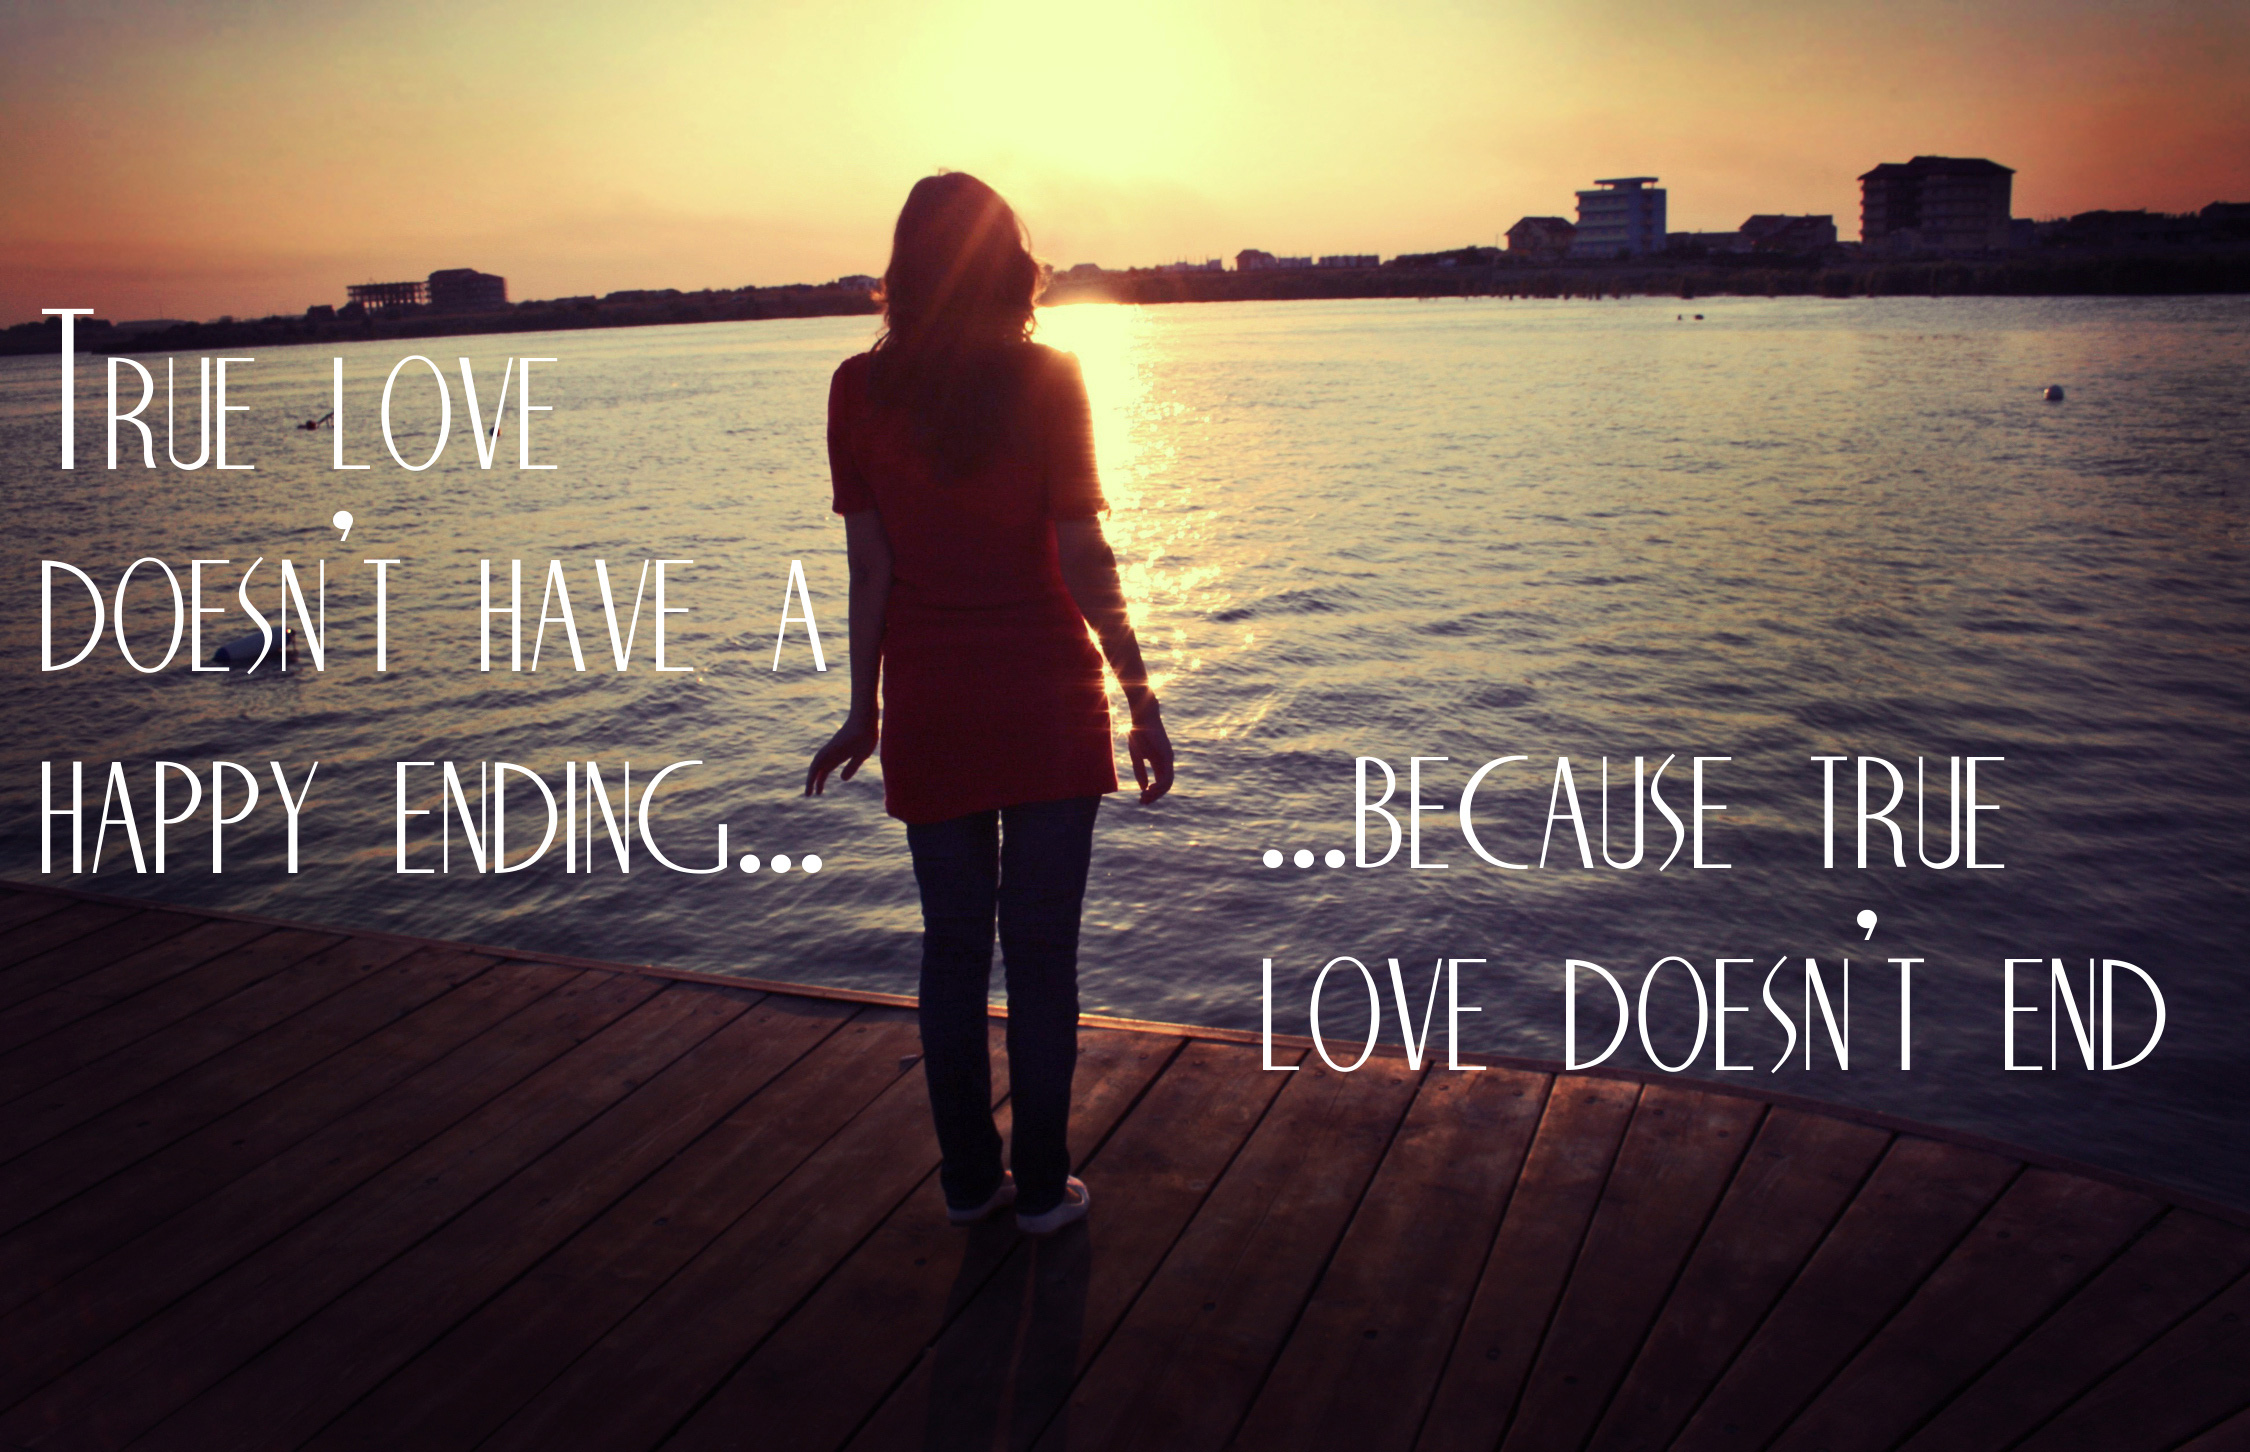 22 True Love Quotes Will Make You Fall In Love